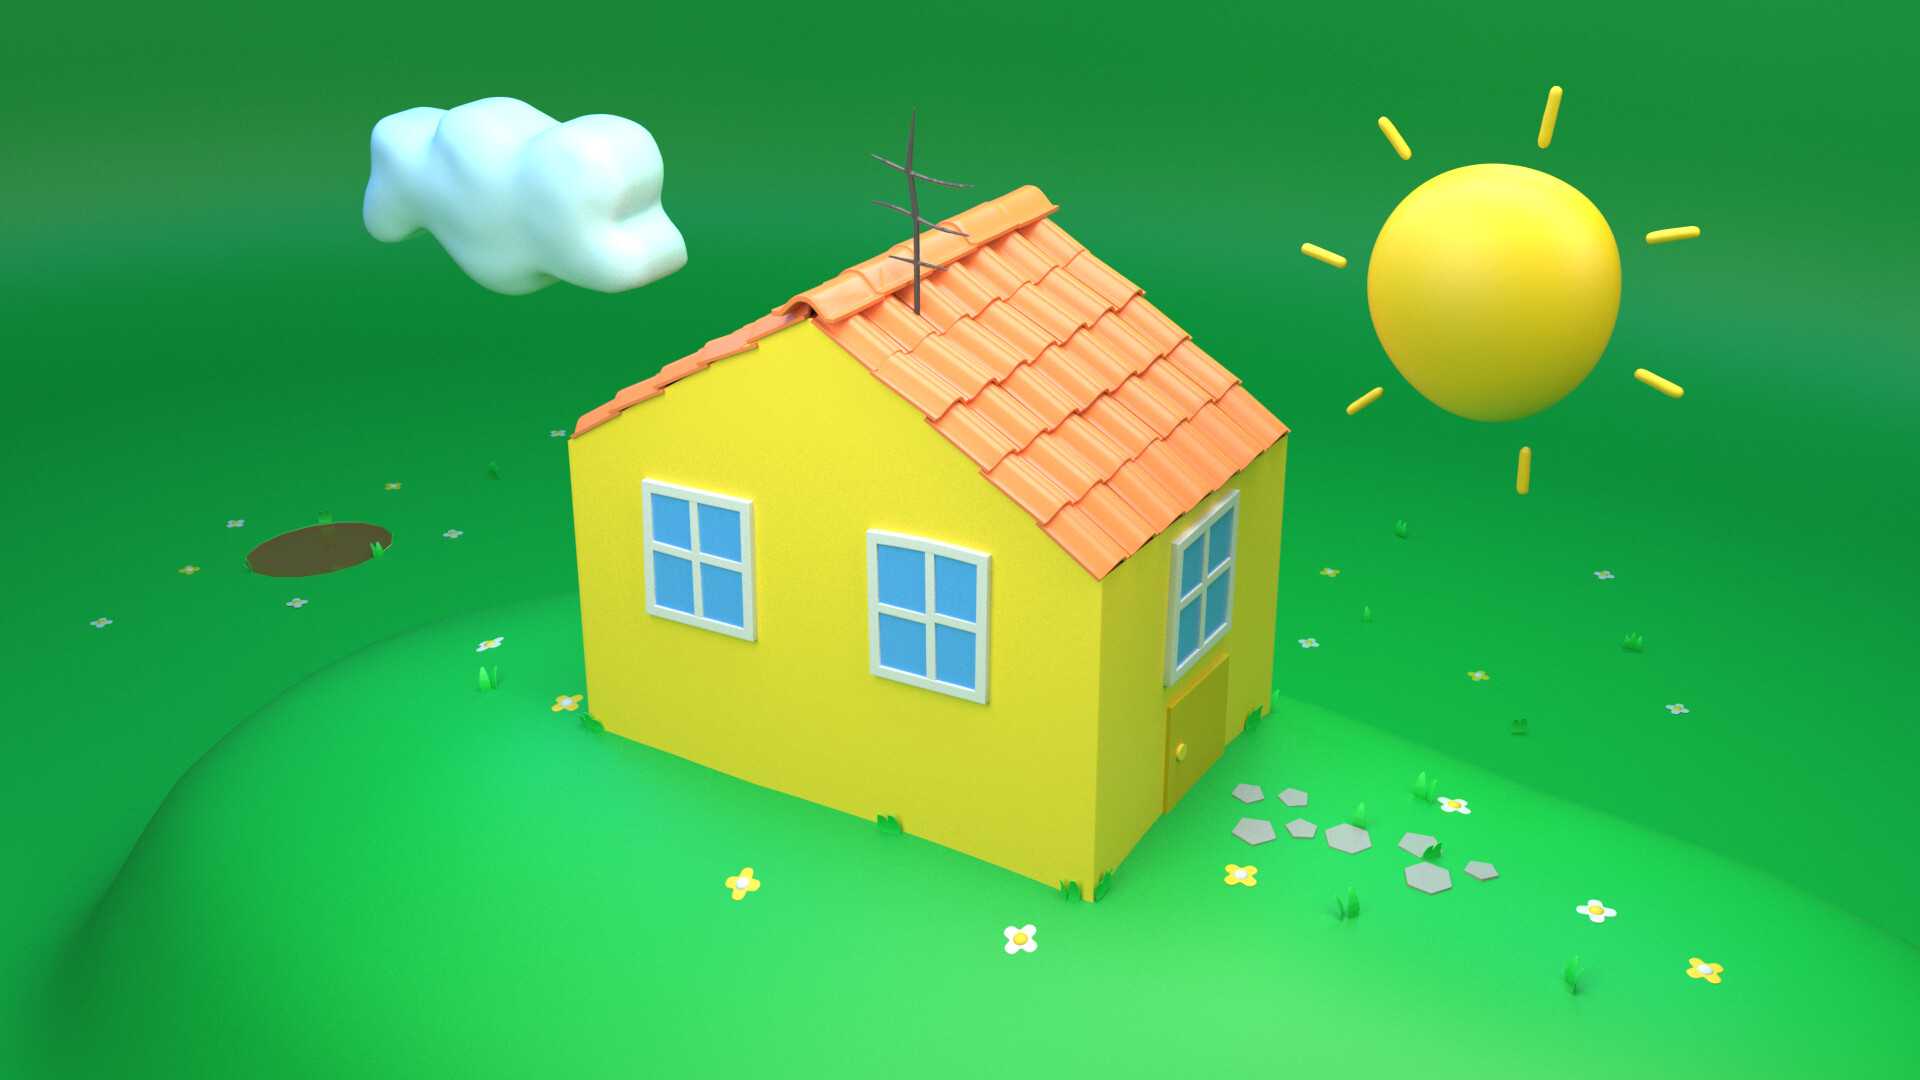 peppa pig house wallpaper creepy pictures